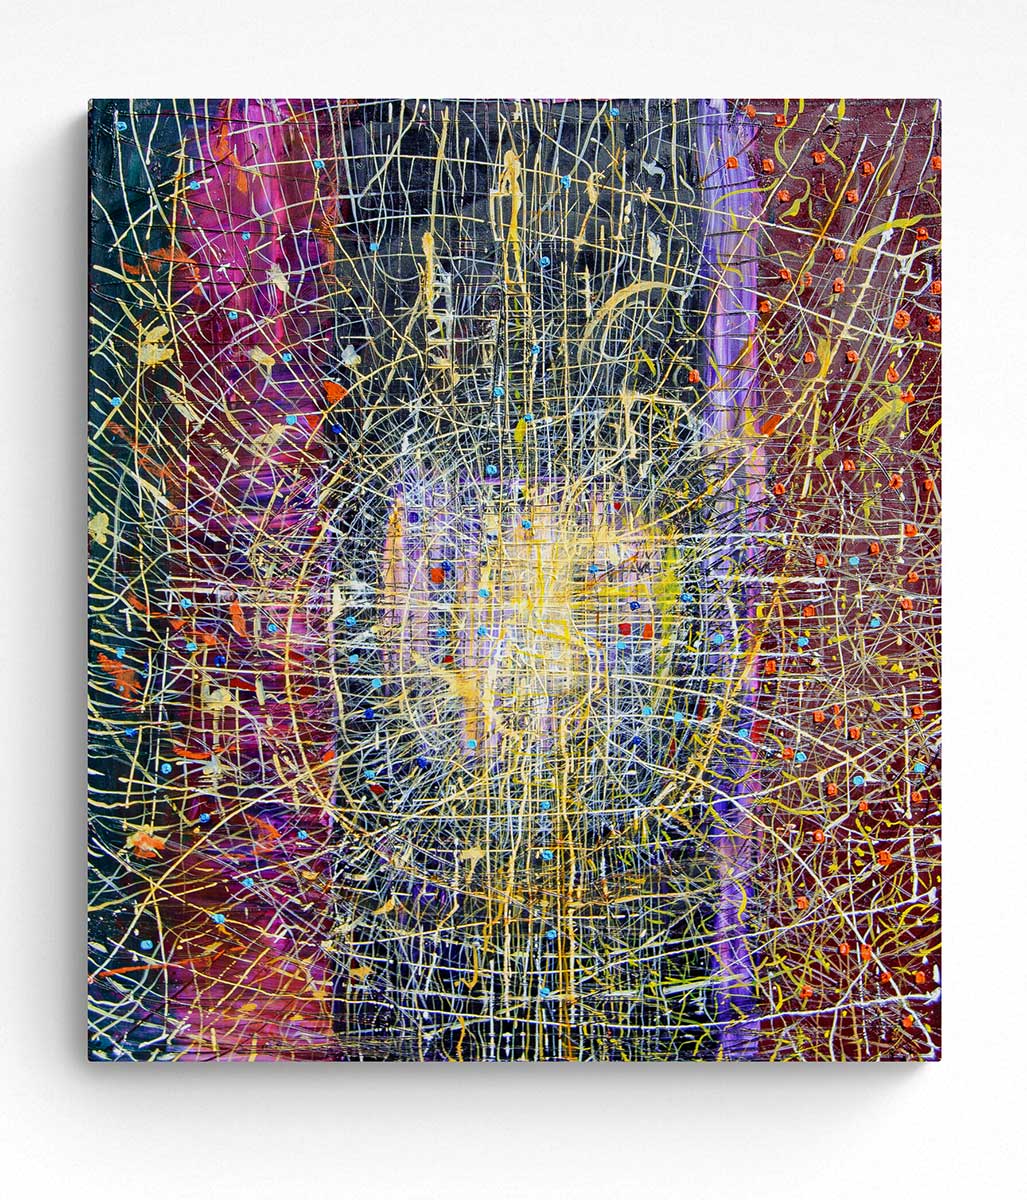 colourful abstract painting on canvas by James de Villiers